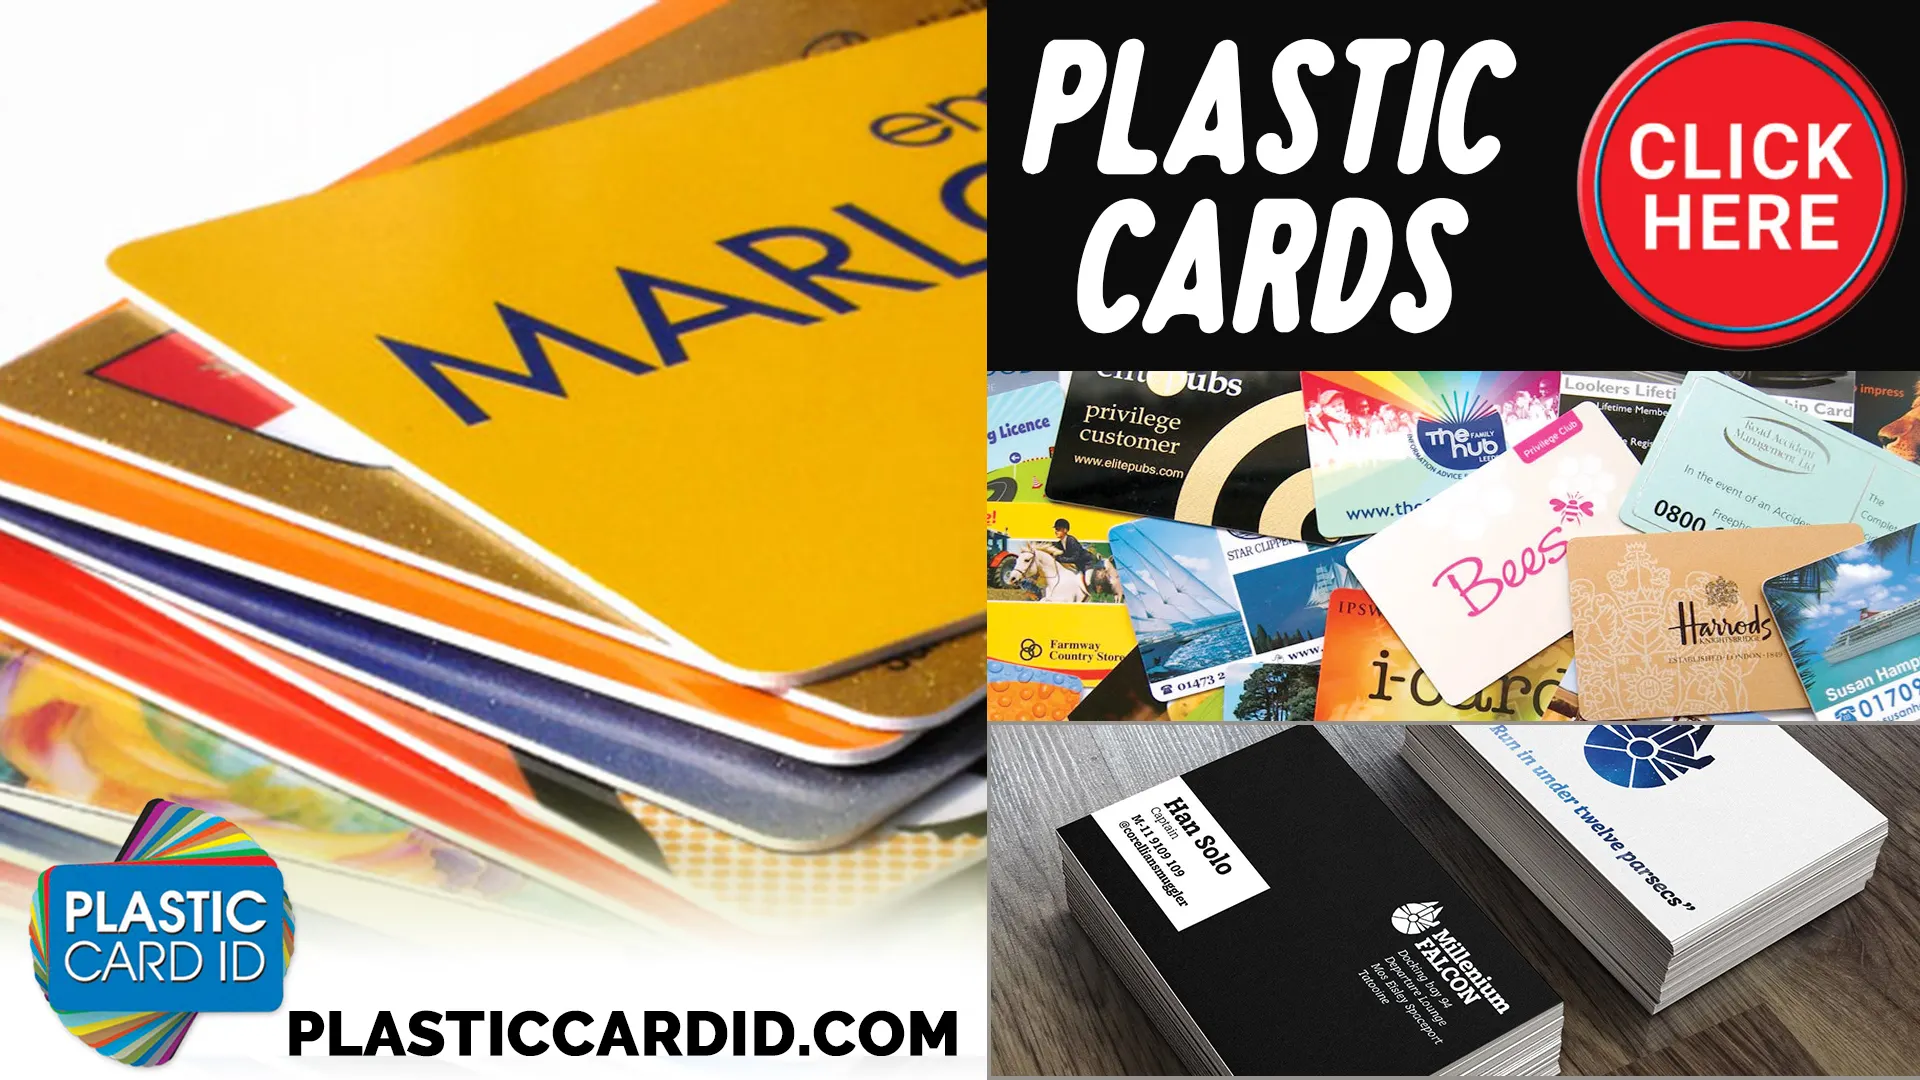 Plastic Card ID
's Advanced Security Features